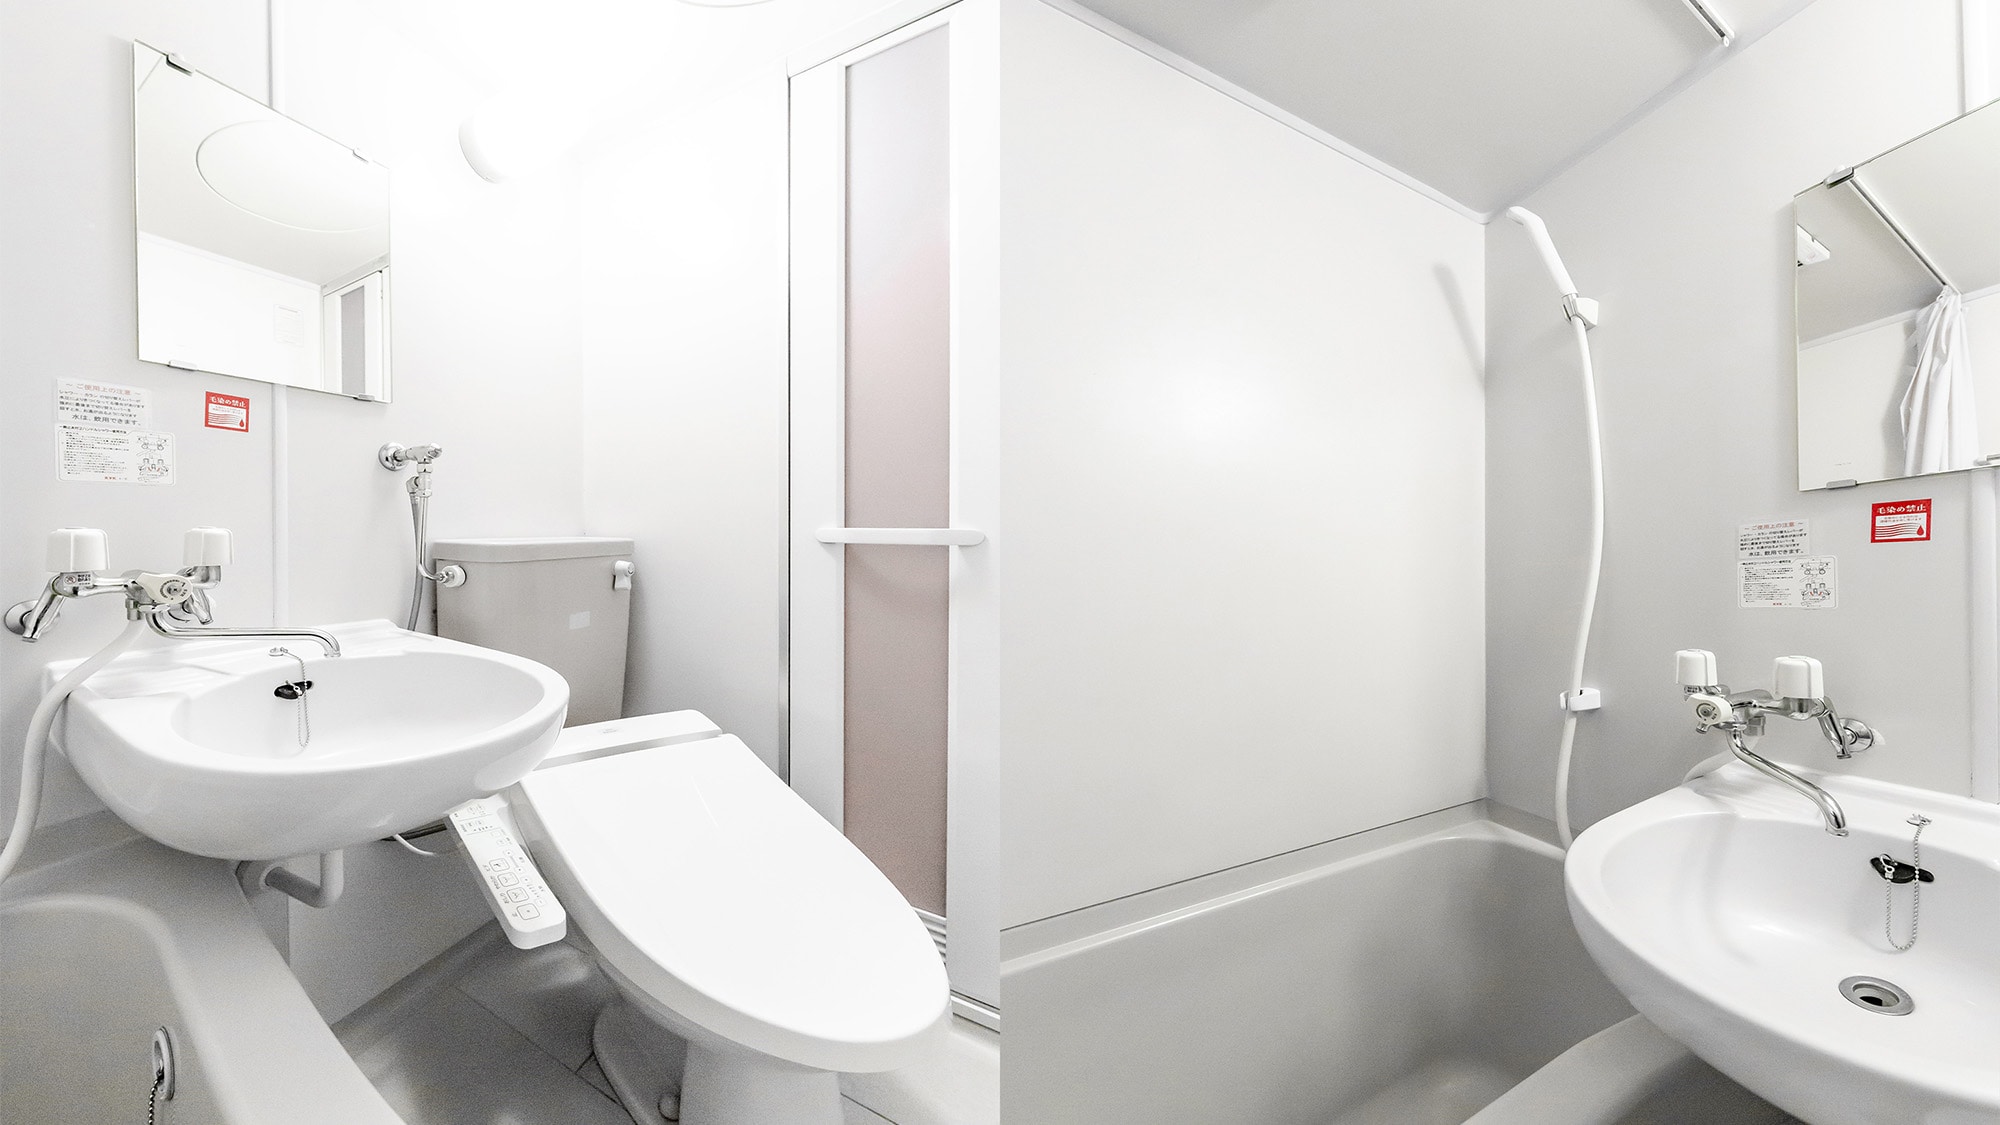 ・ [Example of unit bath] The interior is simple and has a calm atmosphere.